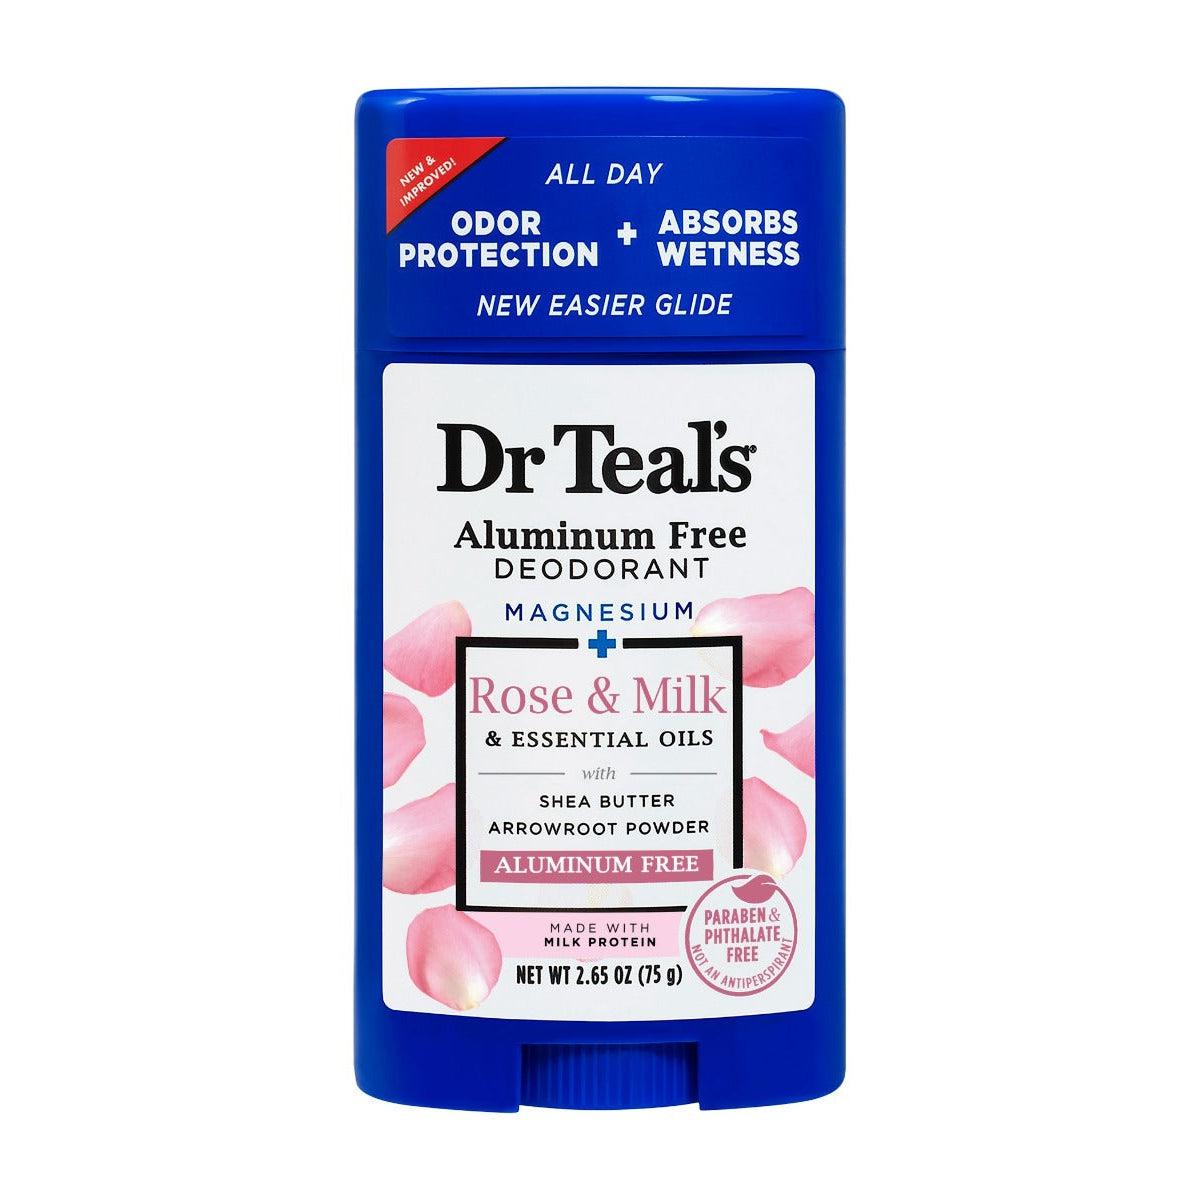 Dr. Teal's Aluminum Free Deodorant Rose & Milk & Essential Oils with Shea Butter 75g